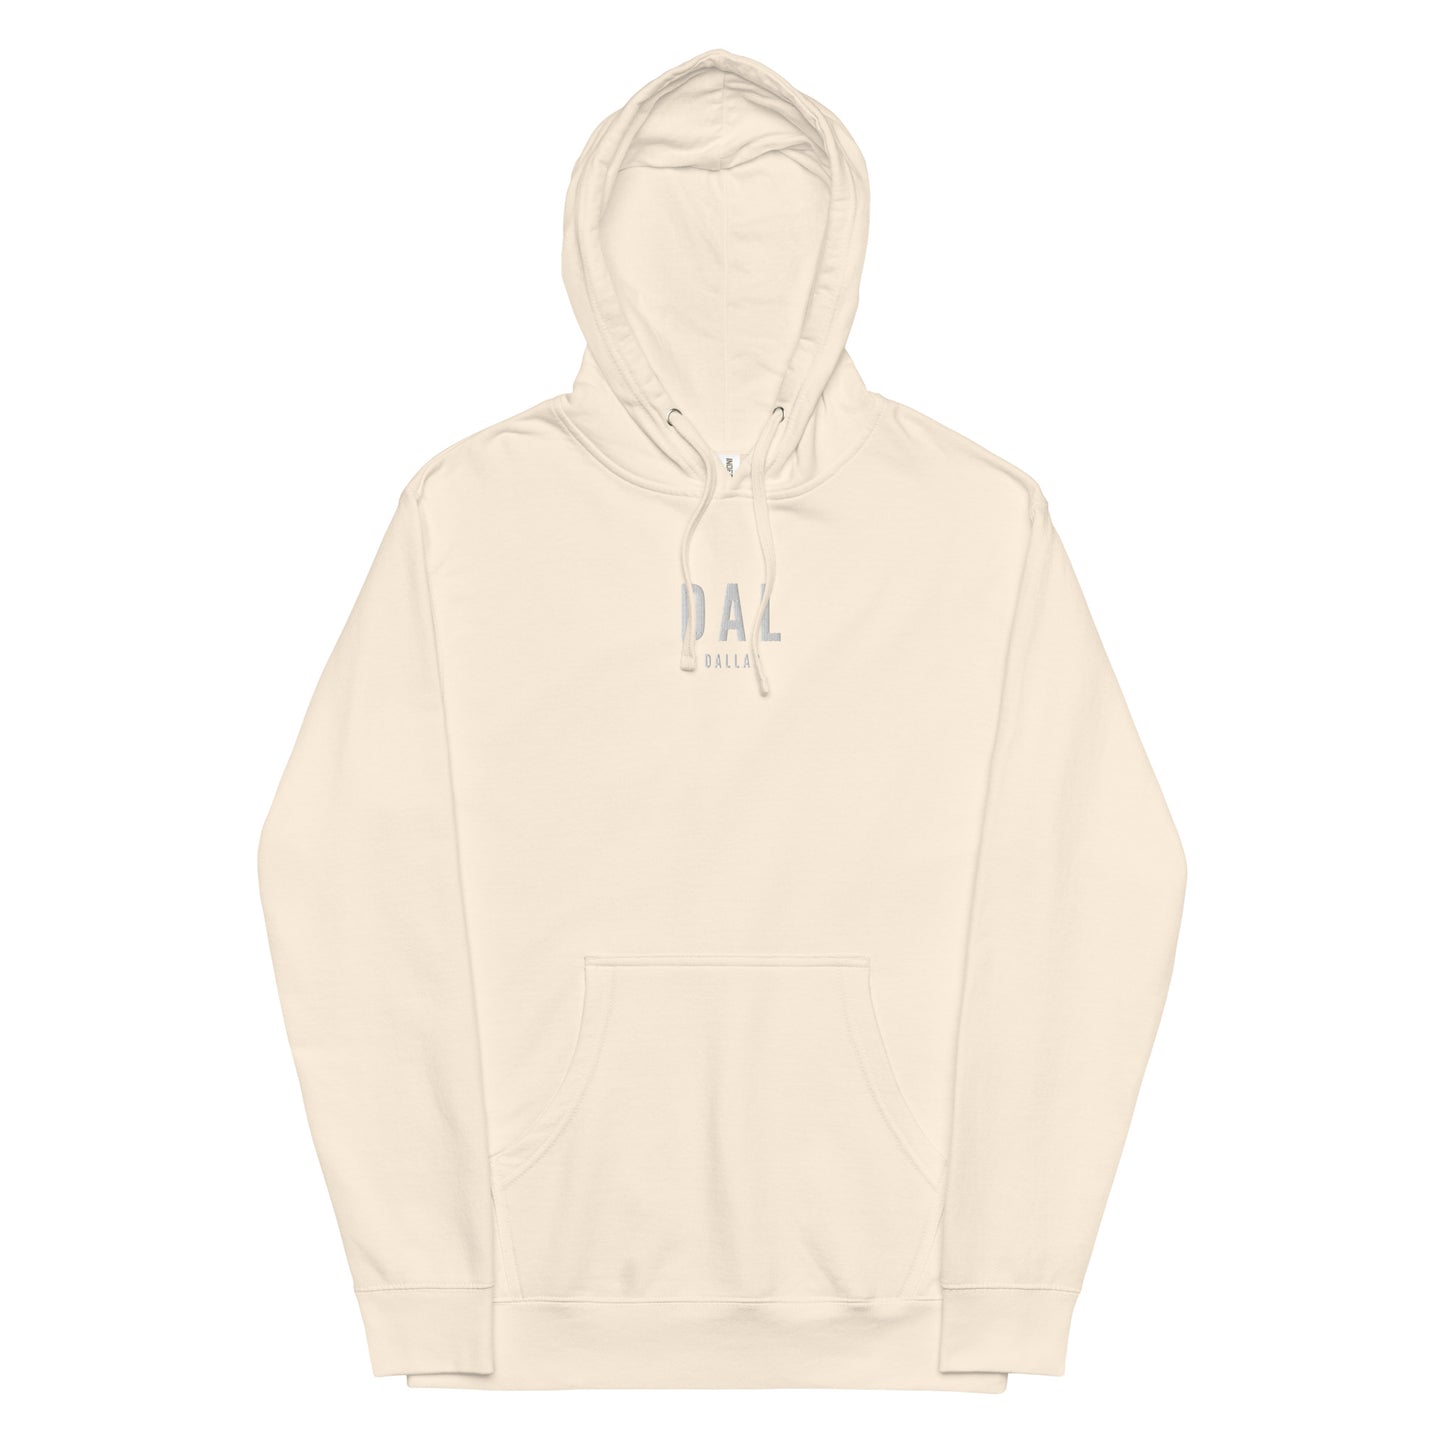 City Midweight Hoodie - White • DAL Dallas • YHM Designs - Image 17